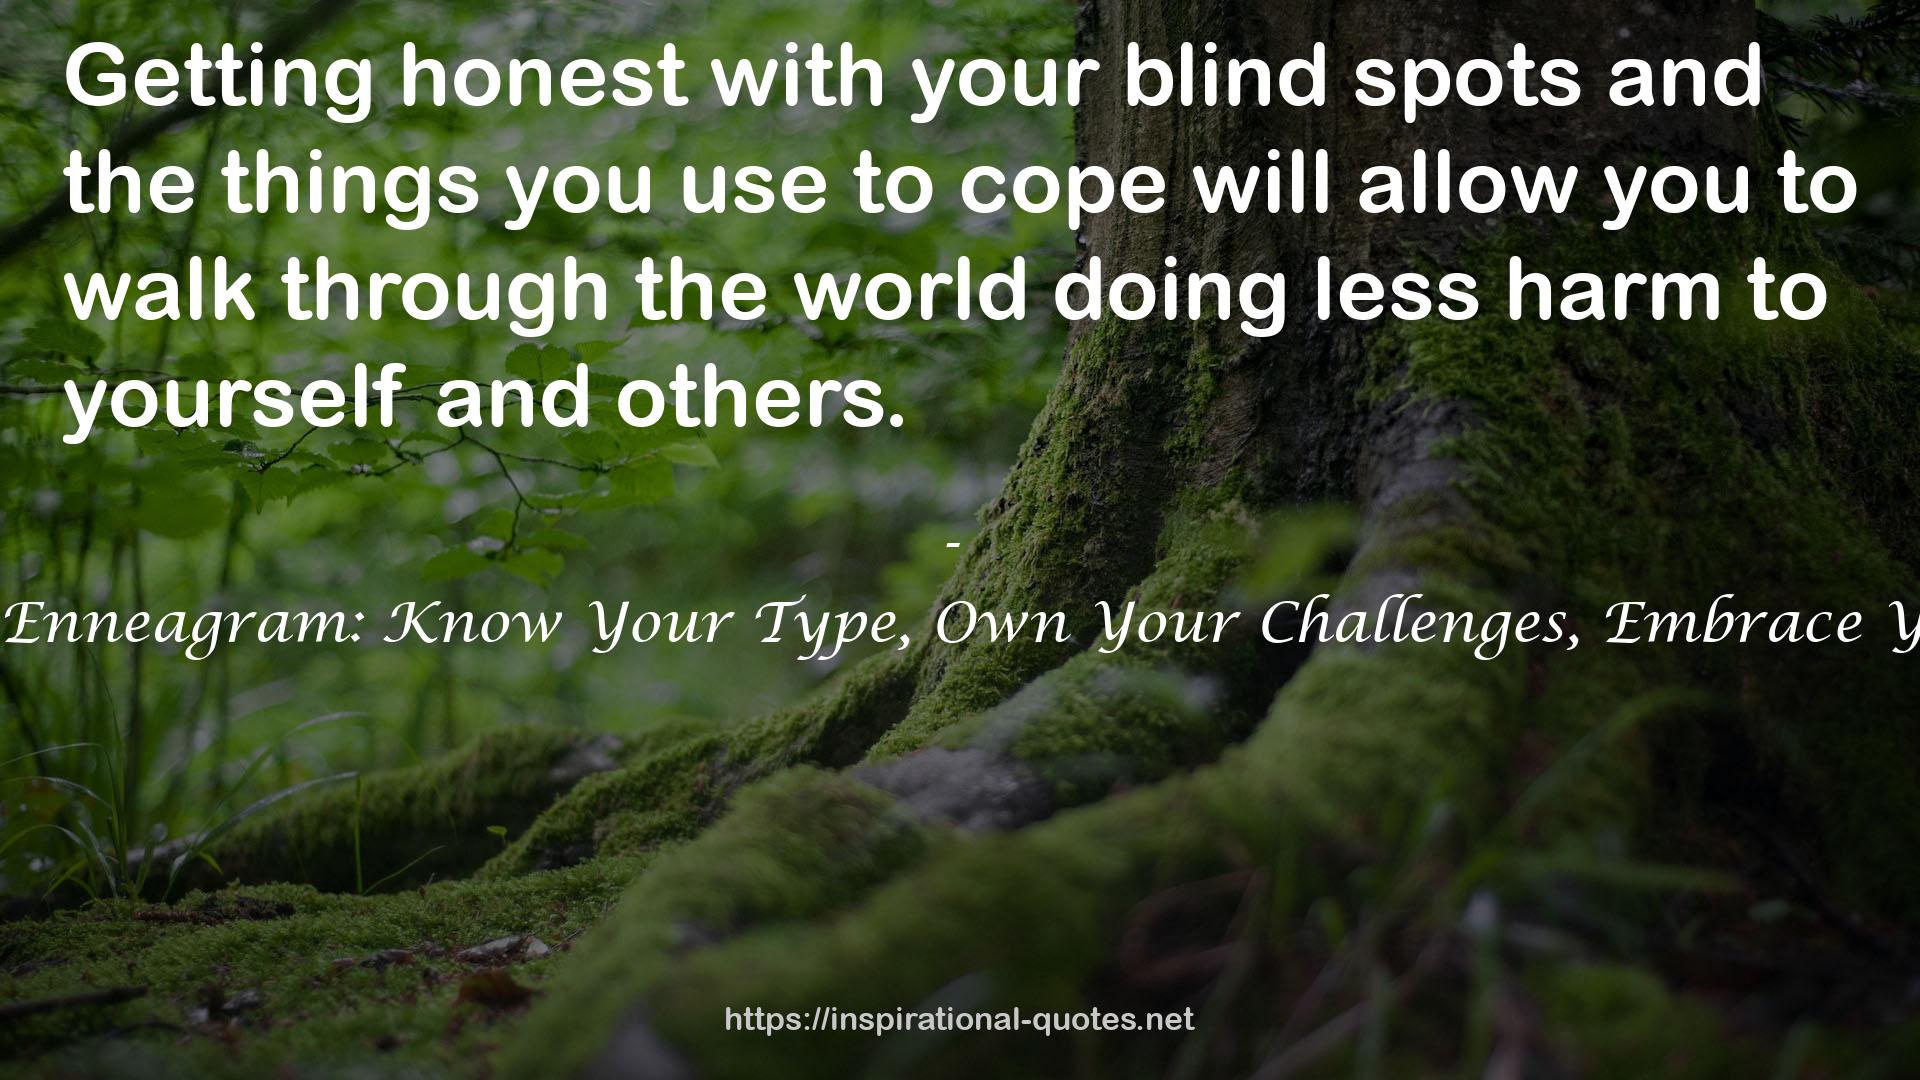 The Honest Enneagram: Know Your Type, Own Your Challenges, Embrace Your Growth QUOTES